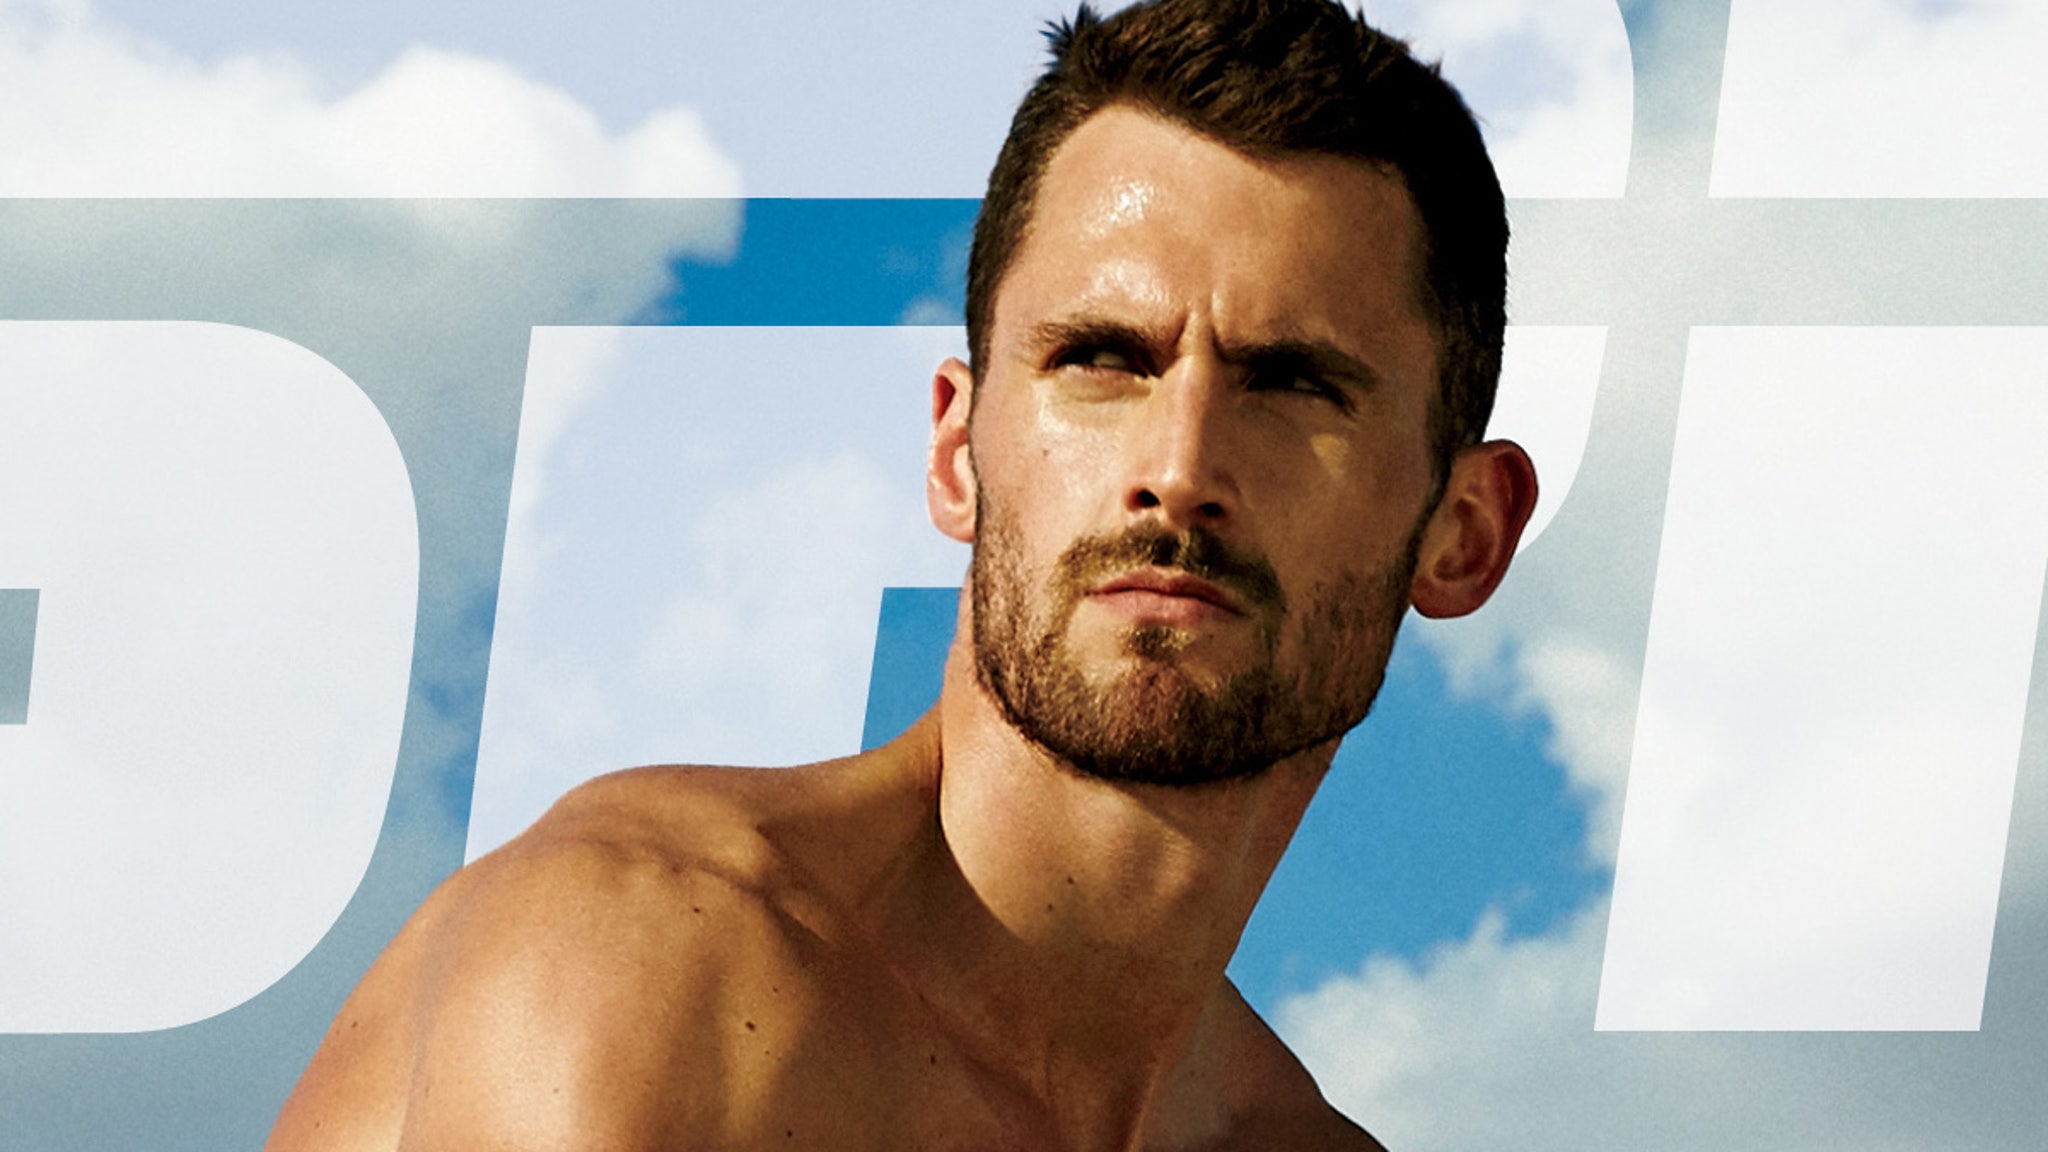 Kevin Love Goes Naked For Espn S Body Issue Talks About Struggles With Weight